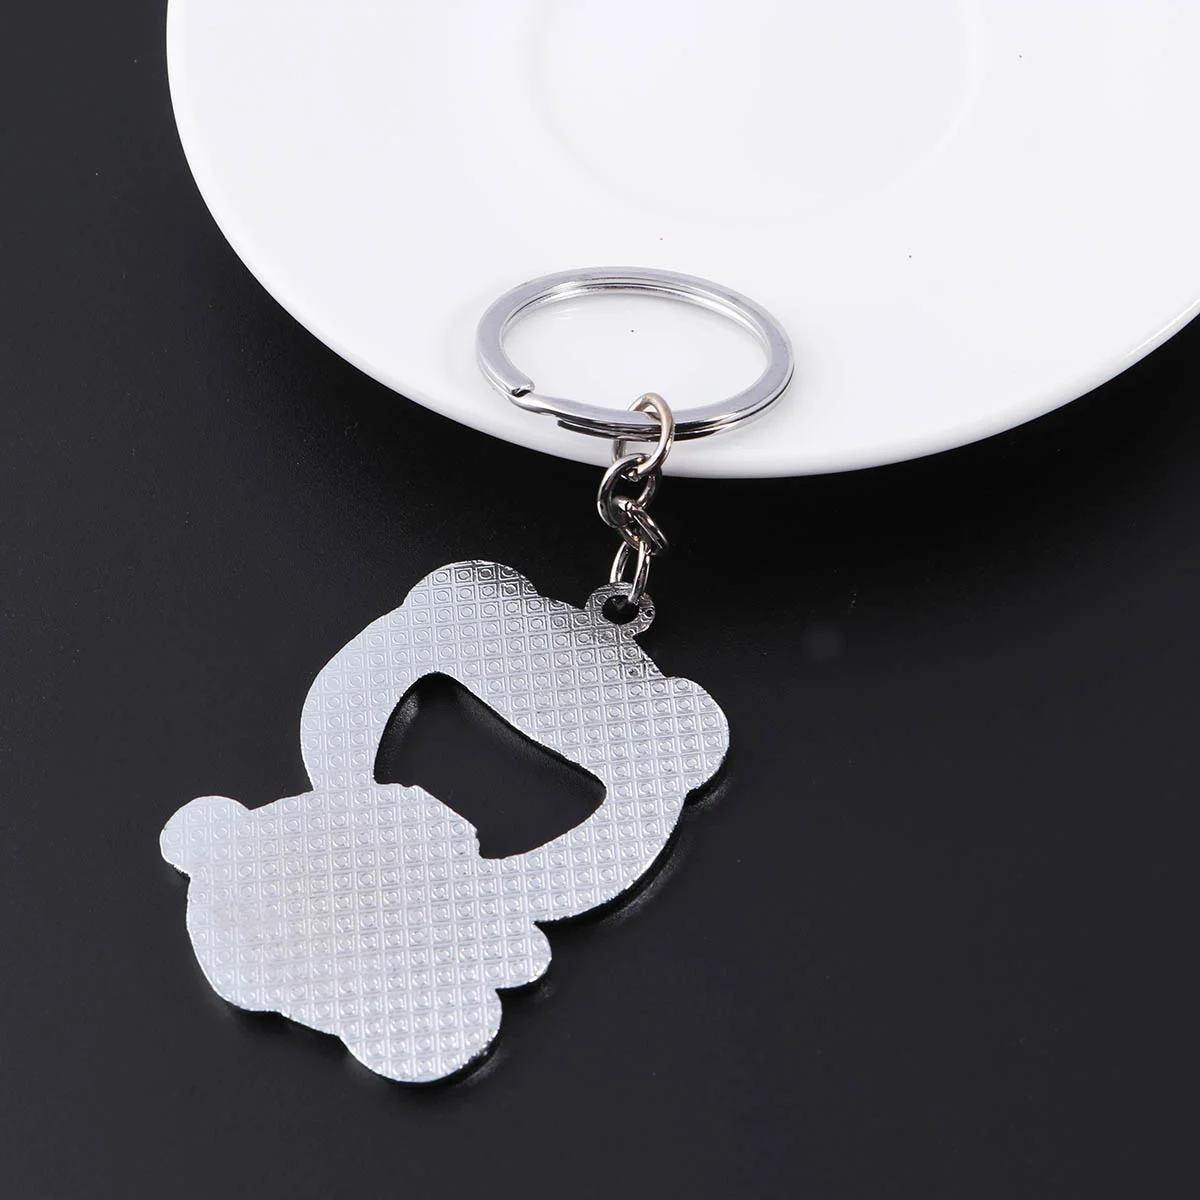 

Cute Panda Key Chain Home Kitchen Dinner Accessory Tools Beer Soda Bottle Opener Key Ring Holiday Gift Hotel Bar Supplies A35